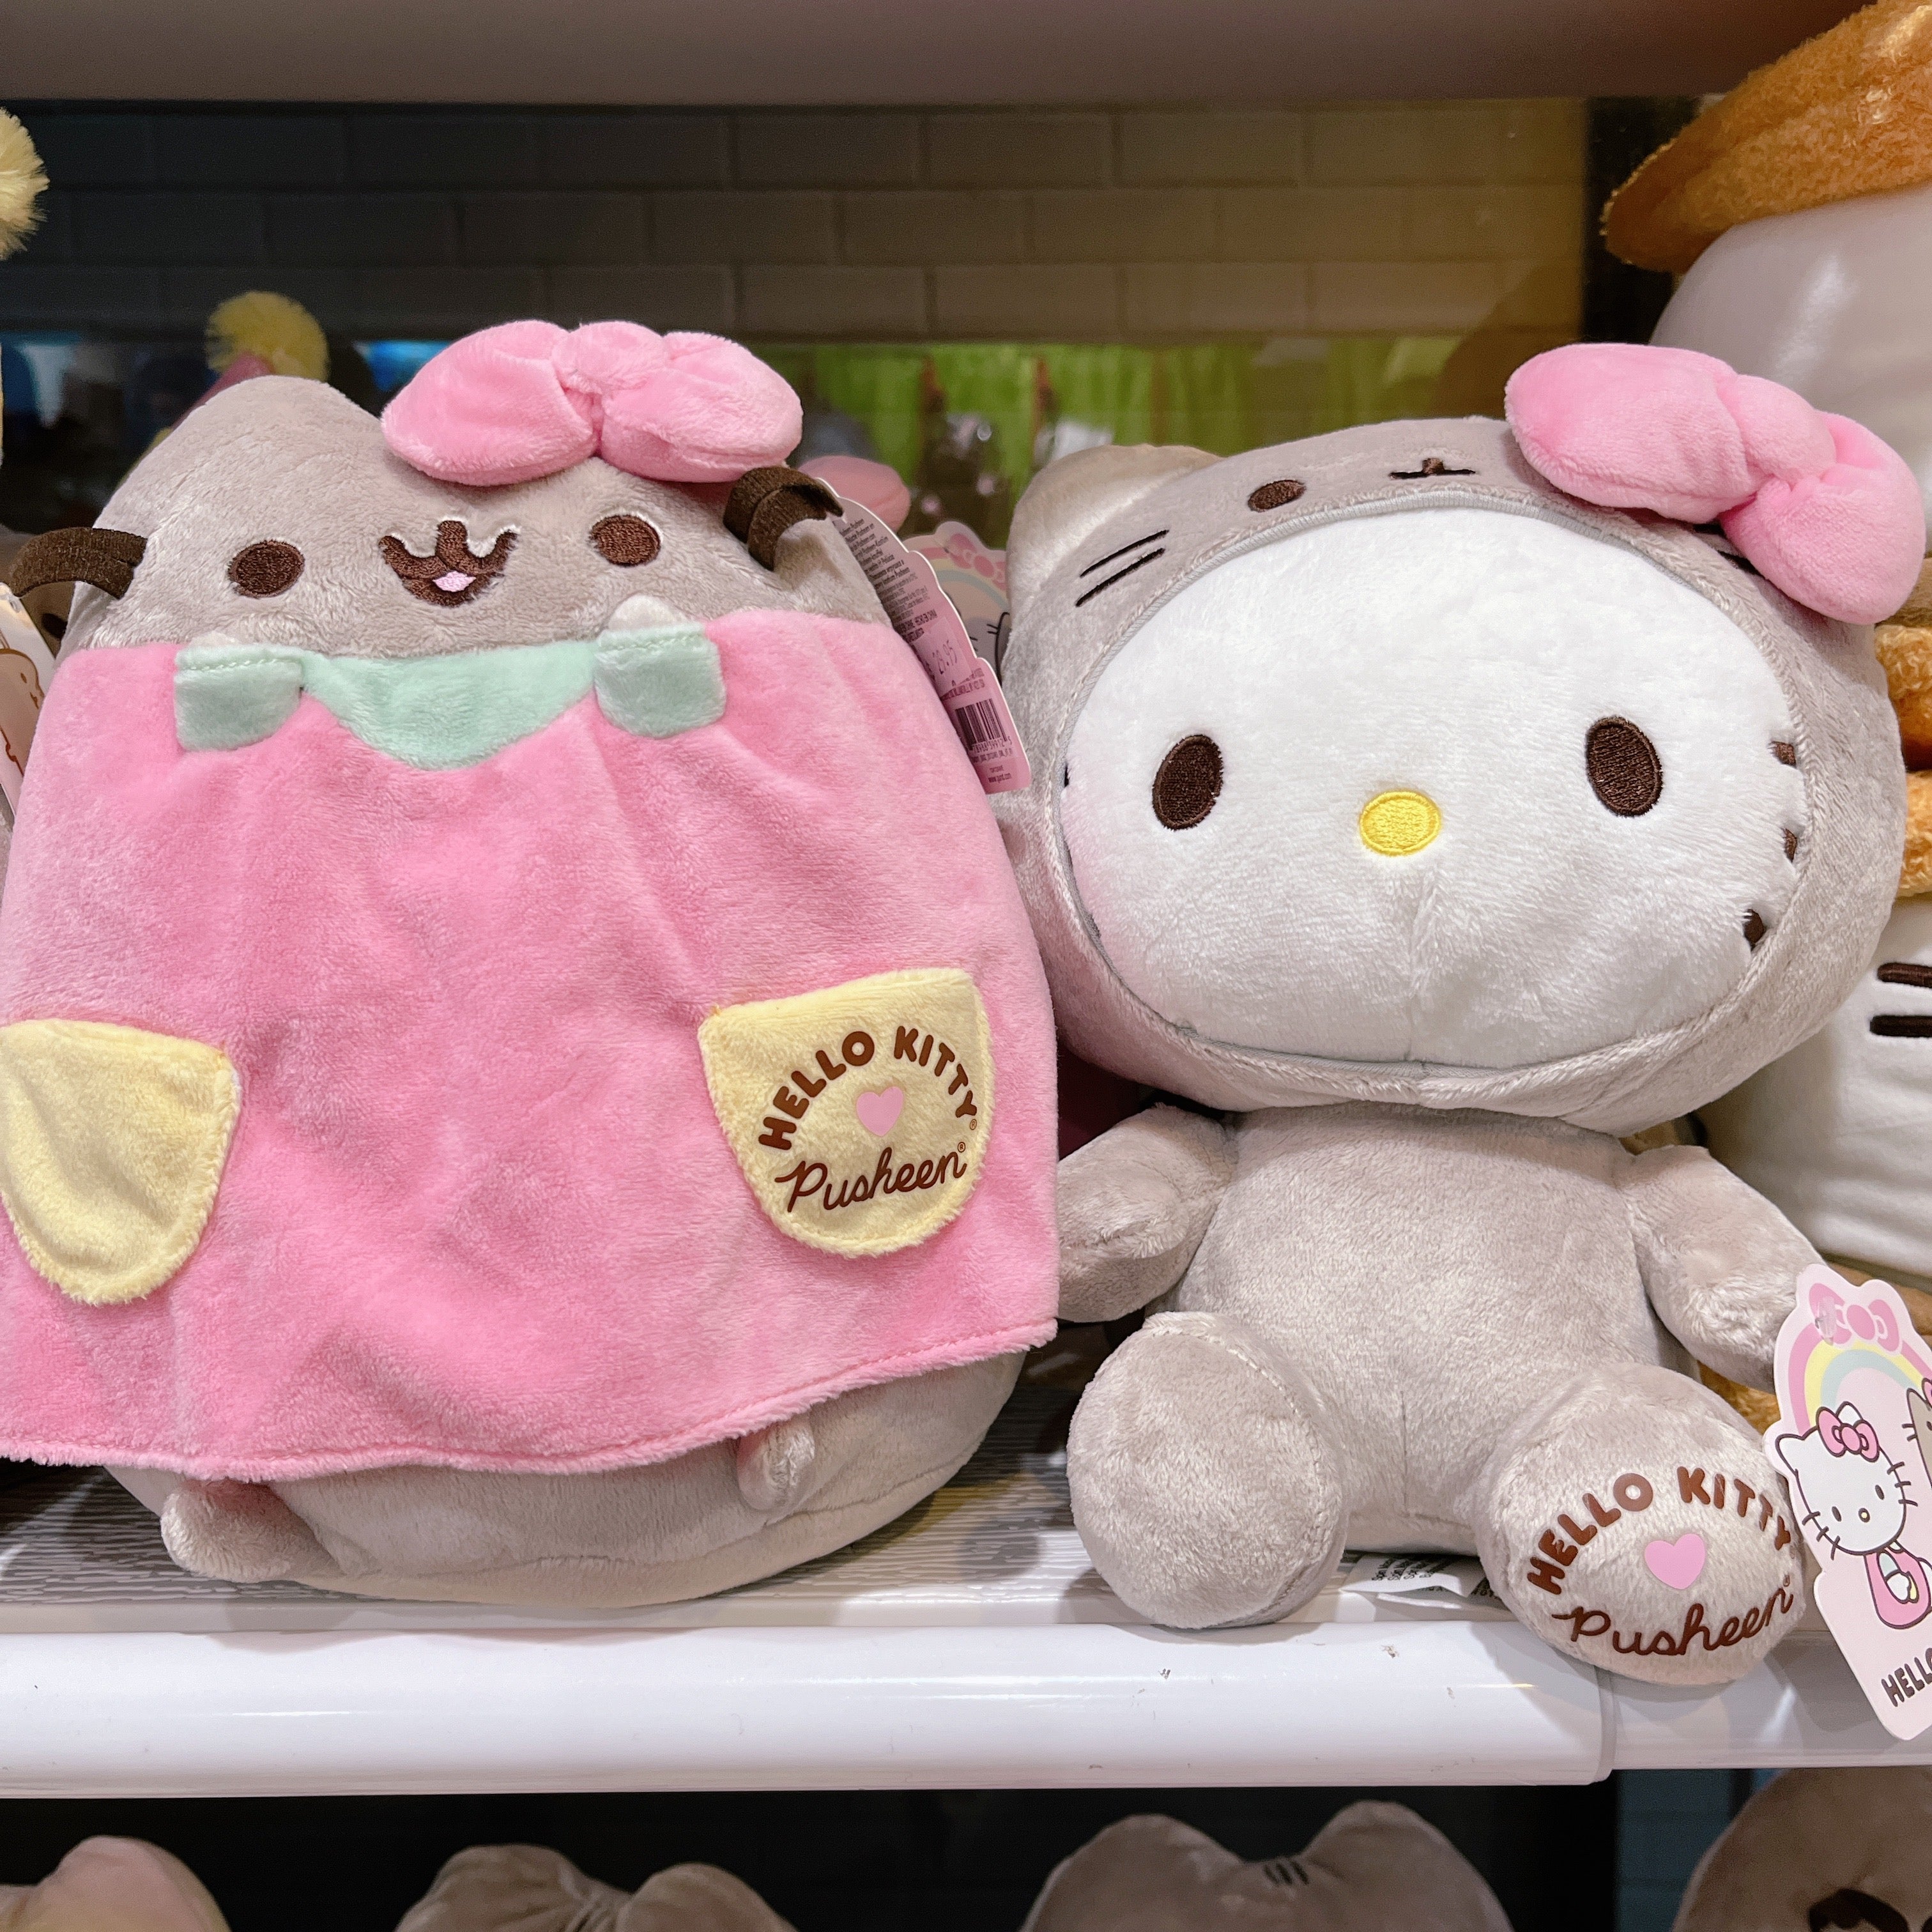 Pusheen Meowshmallows with Removable Mini Plush, 7.5 in - Gund